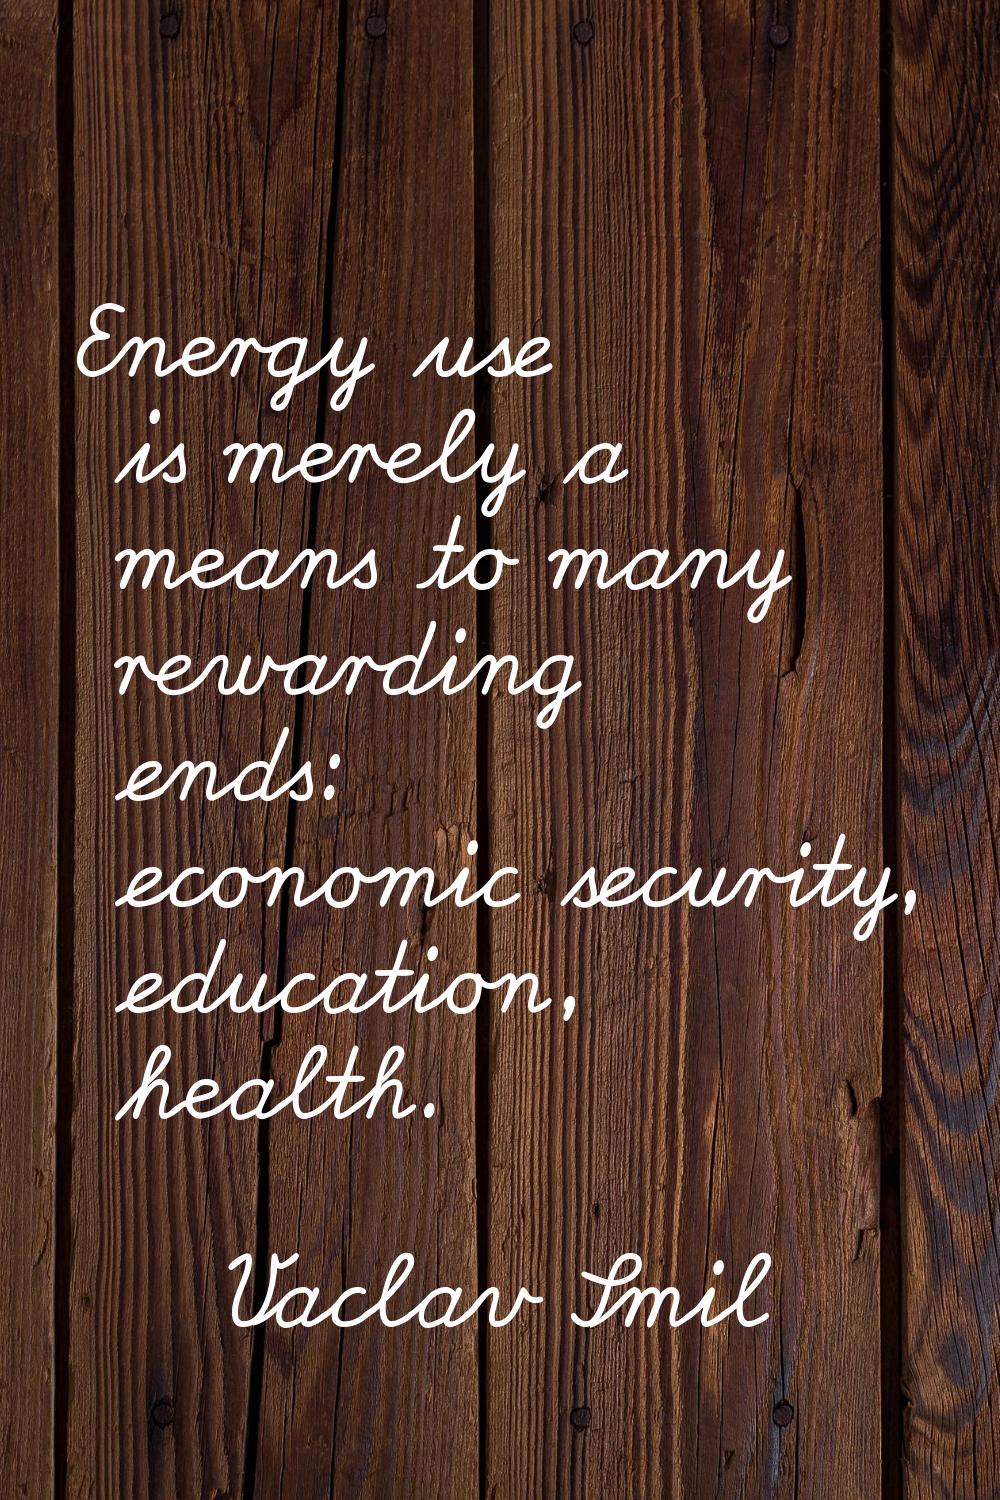 Energy use is merely a means to many rewarding ends: economic security, education, health.